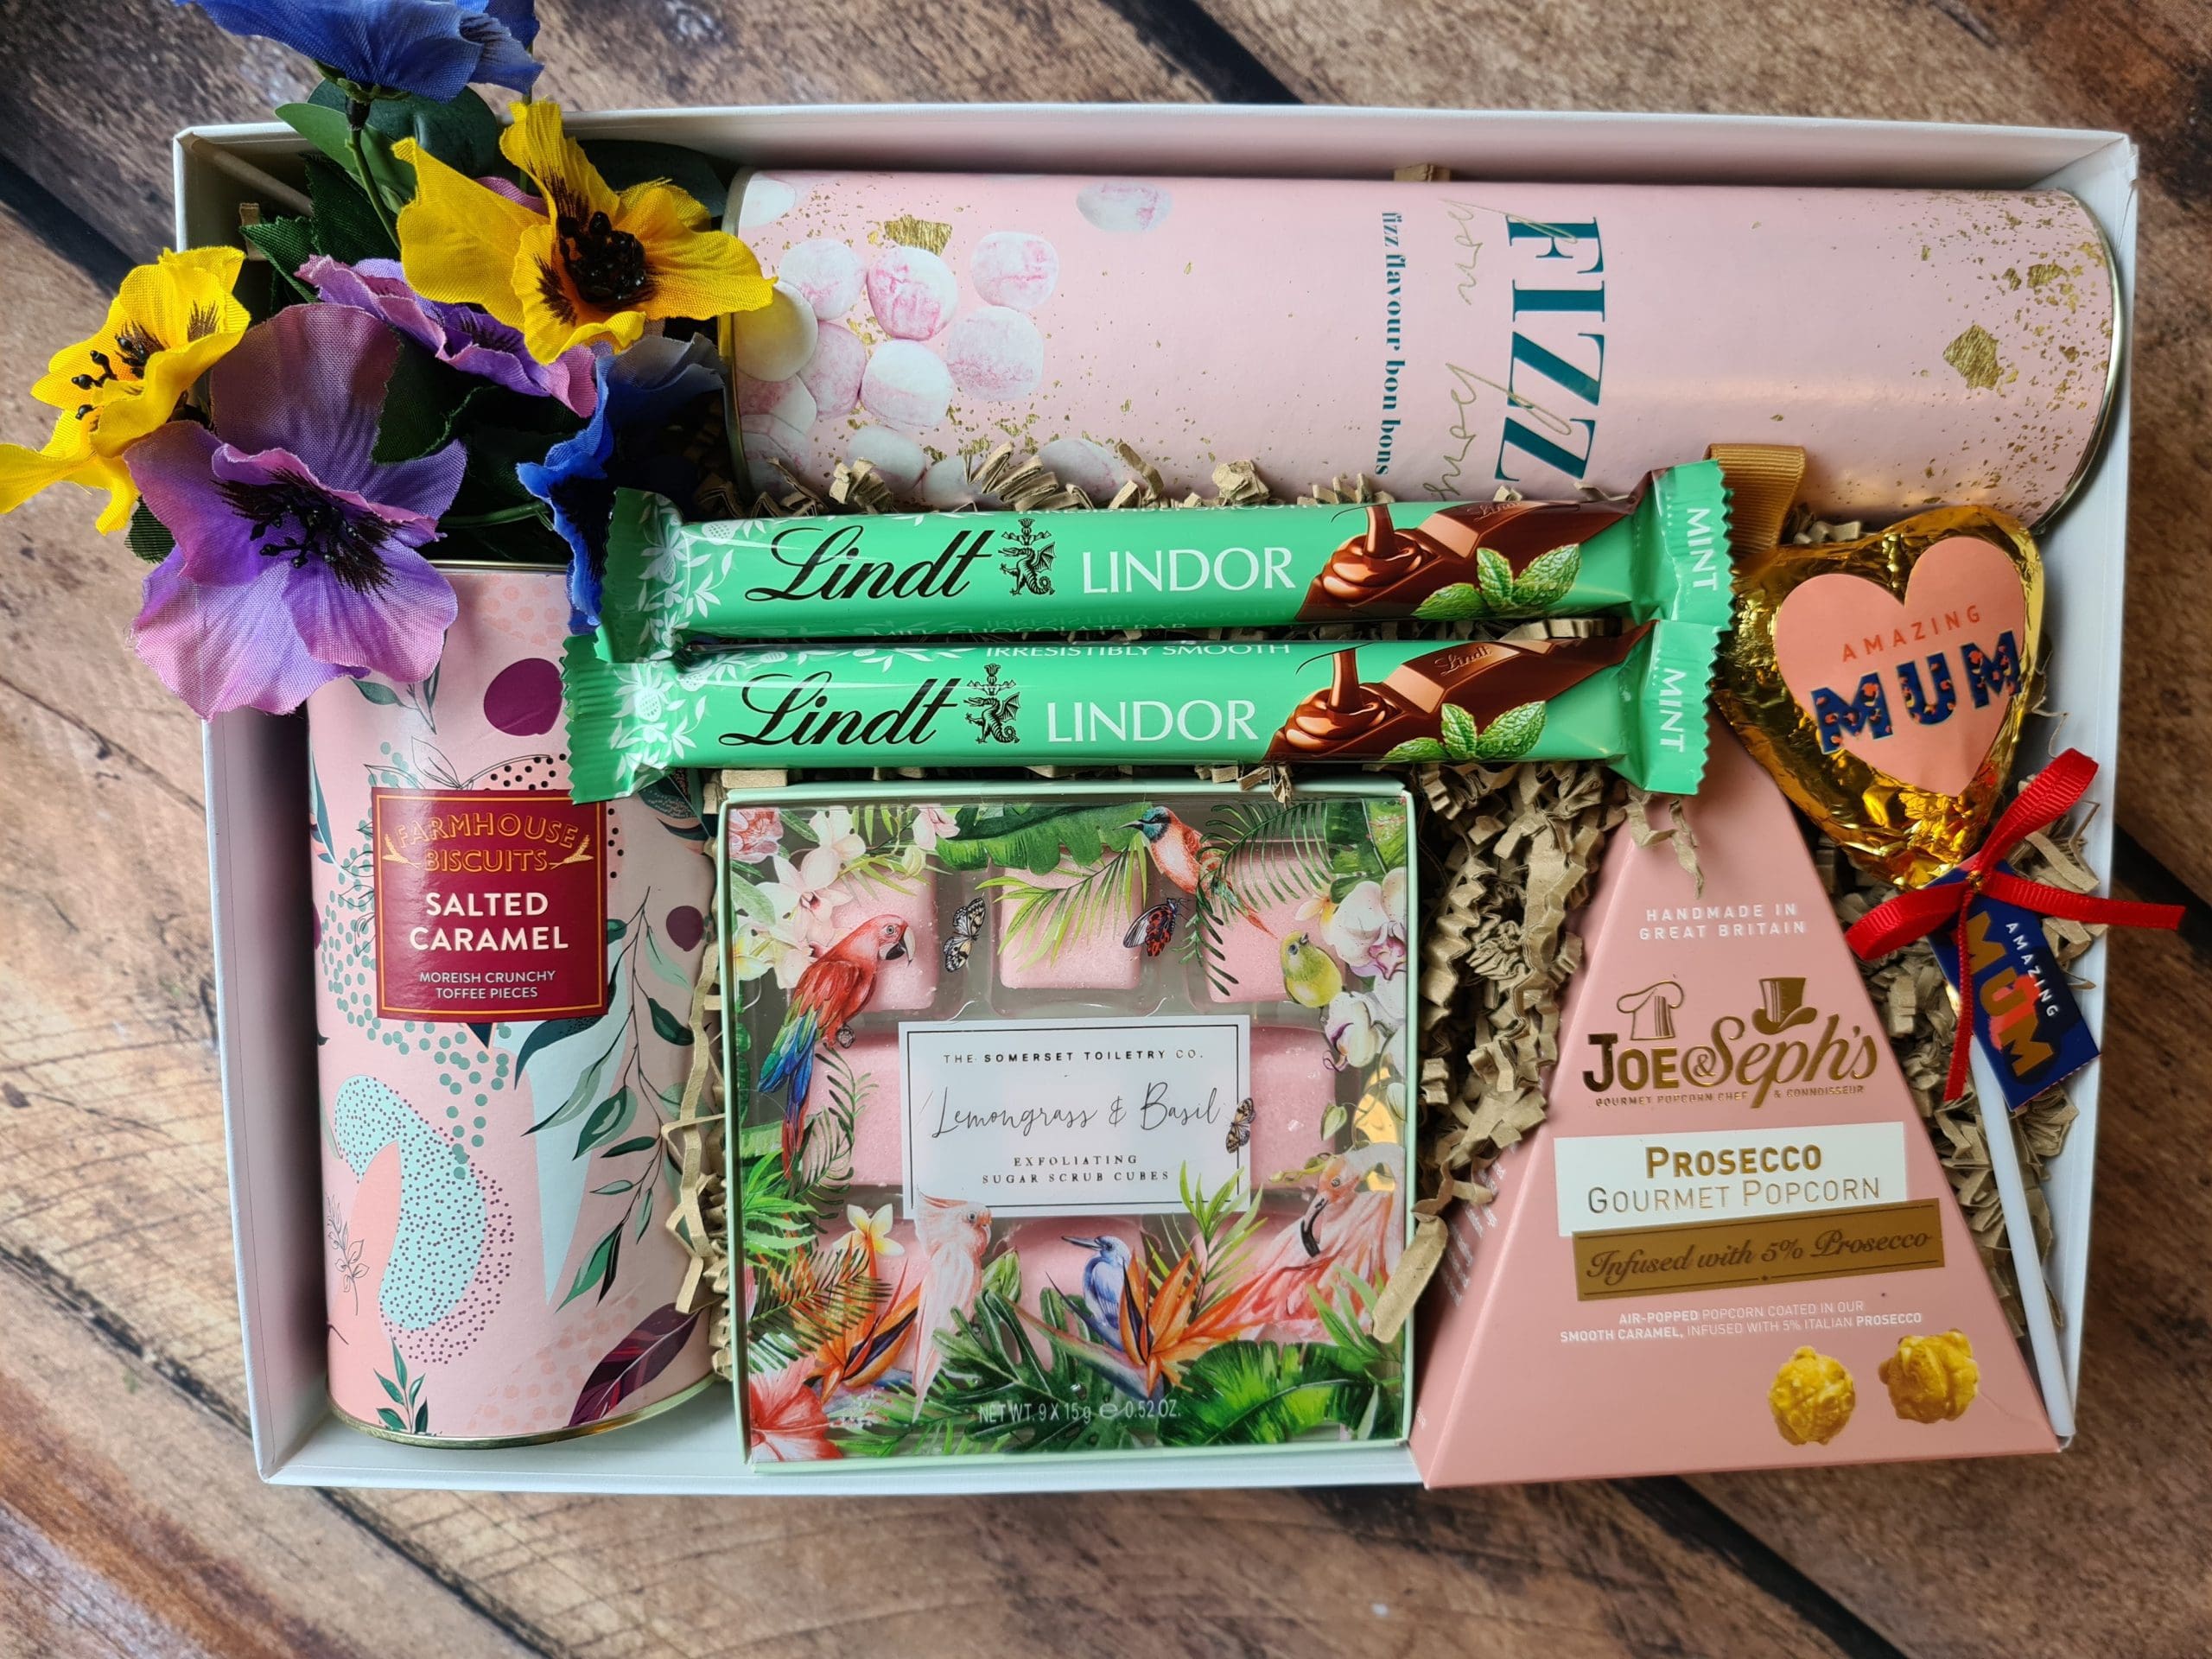 Fizz-Tastic Mum Hamper, black-owned gifts, mother's day gifts, hampers